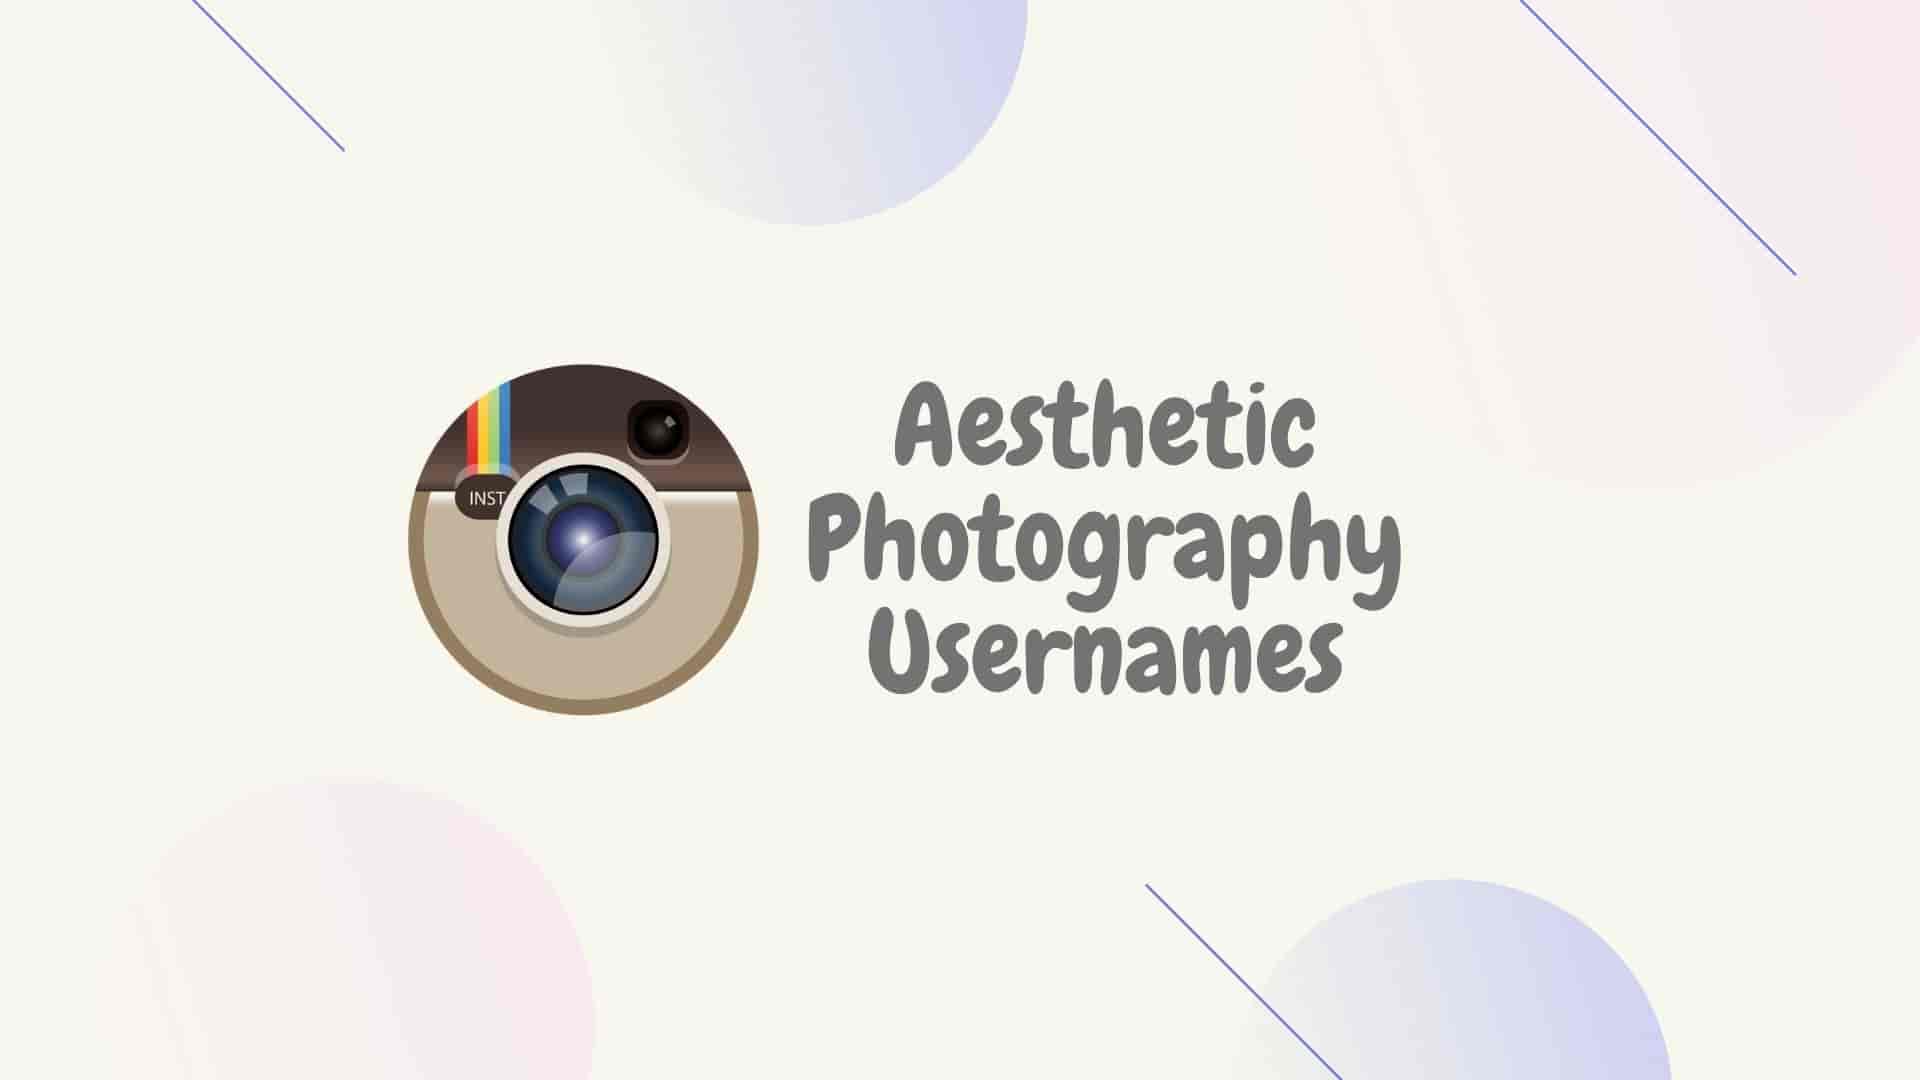 Aesthetic Photograph Usernames, Cute And Creative Photography Names For Instagram, Names For Instagram Photography Page, Cute Photography Name Ideas, Aesthetic Photography Usernames, Mobile Photography Page Names For Instagram, Photography Username Ideas, Photographer Nicknames For Instagram, Creative Photography Usernames For Instagram